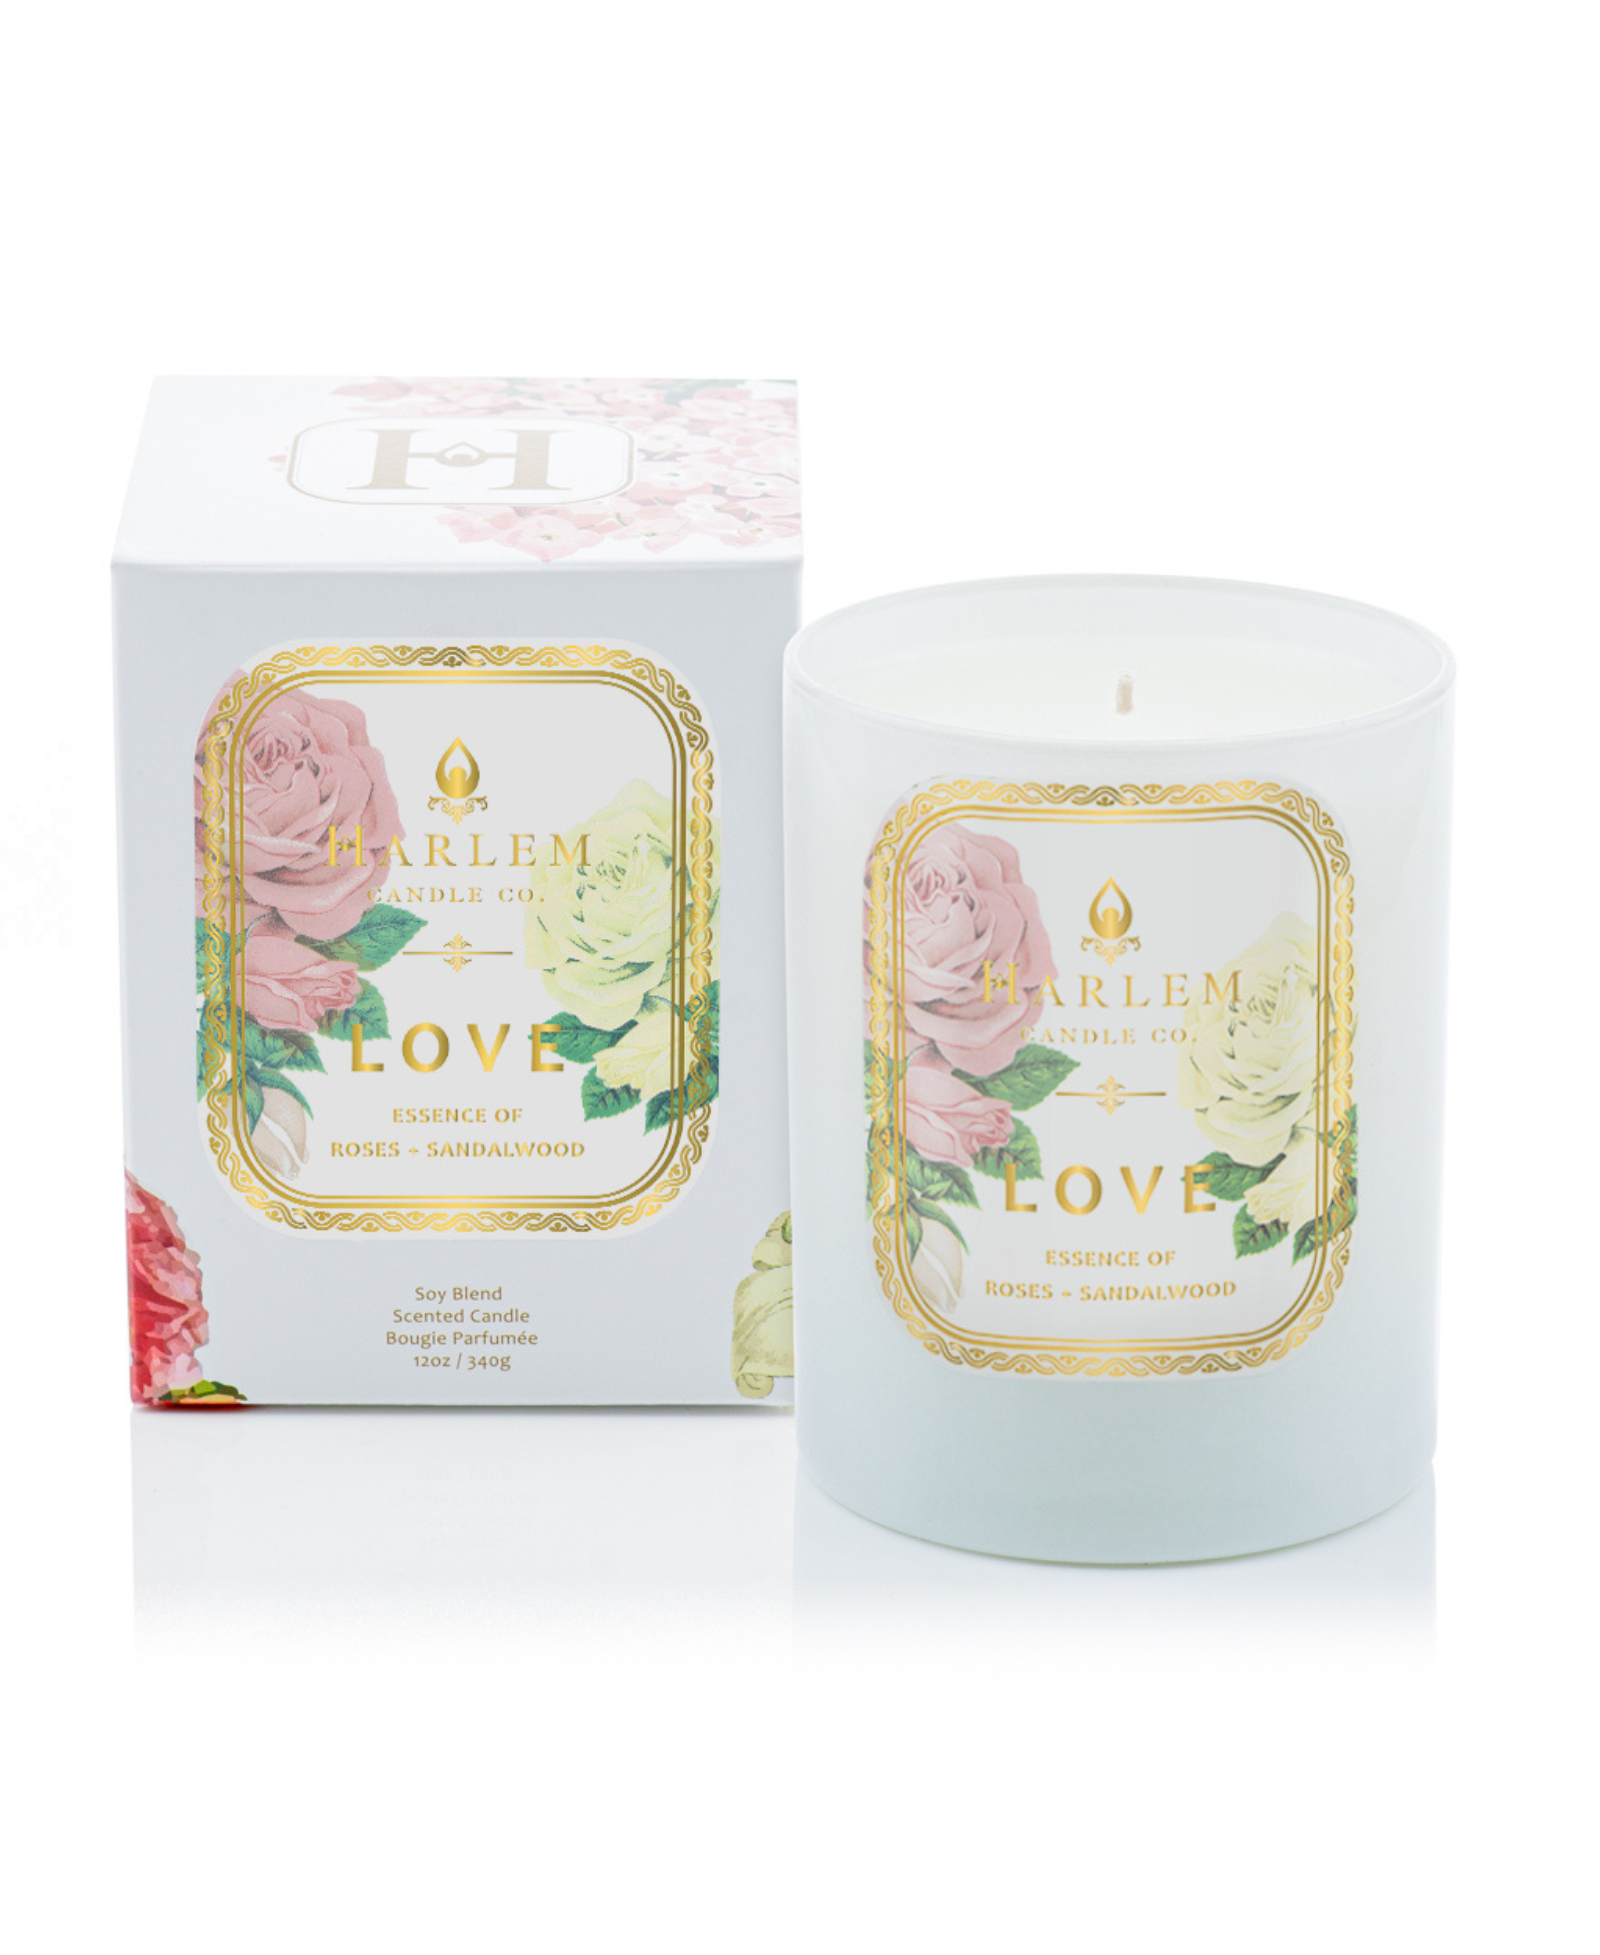 Photo of our Love Botanical candle with box